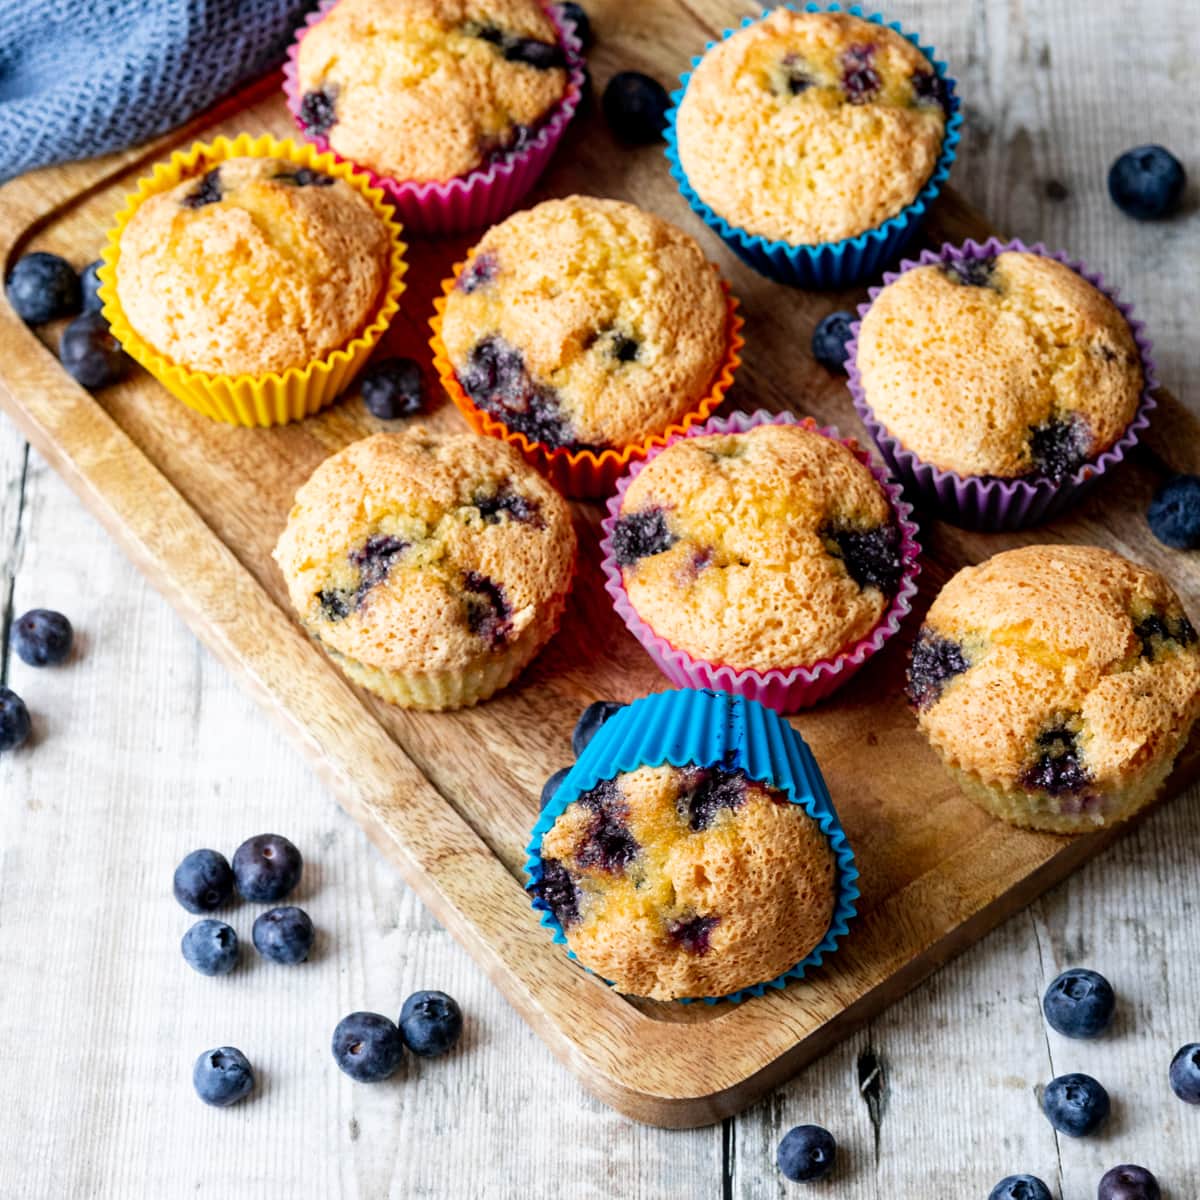 Blueberry and almond muffins